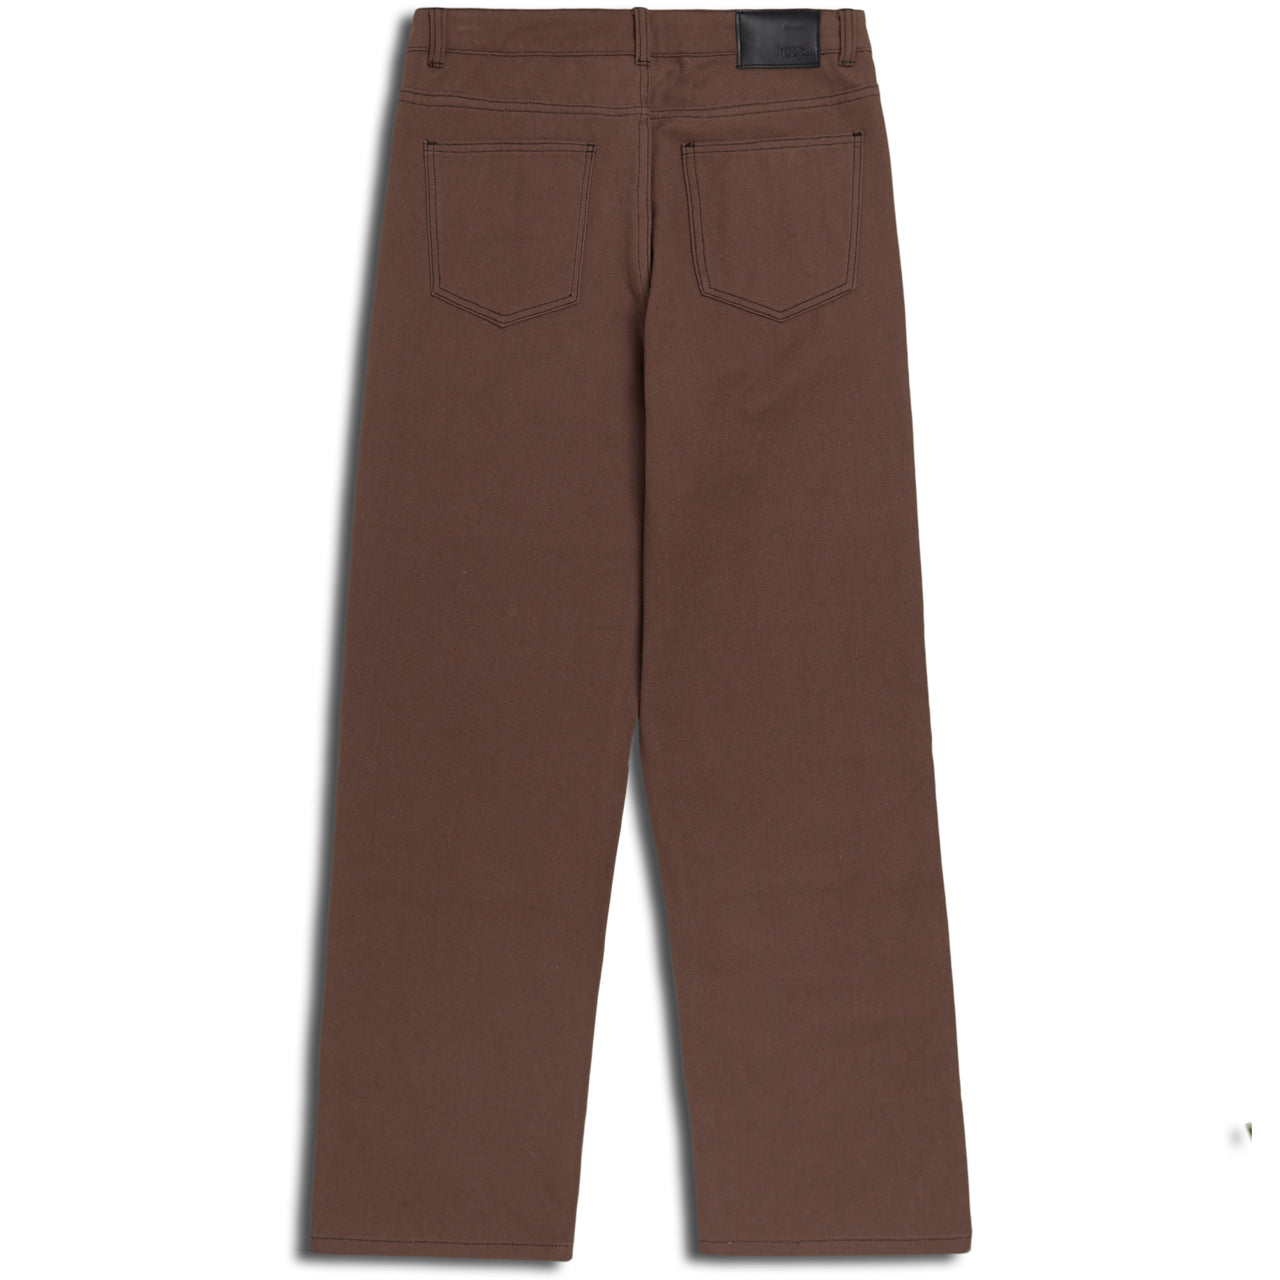 CCS Double Knee Original Relaxed Canvas Pants - Brown/Black image 4